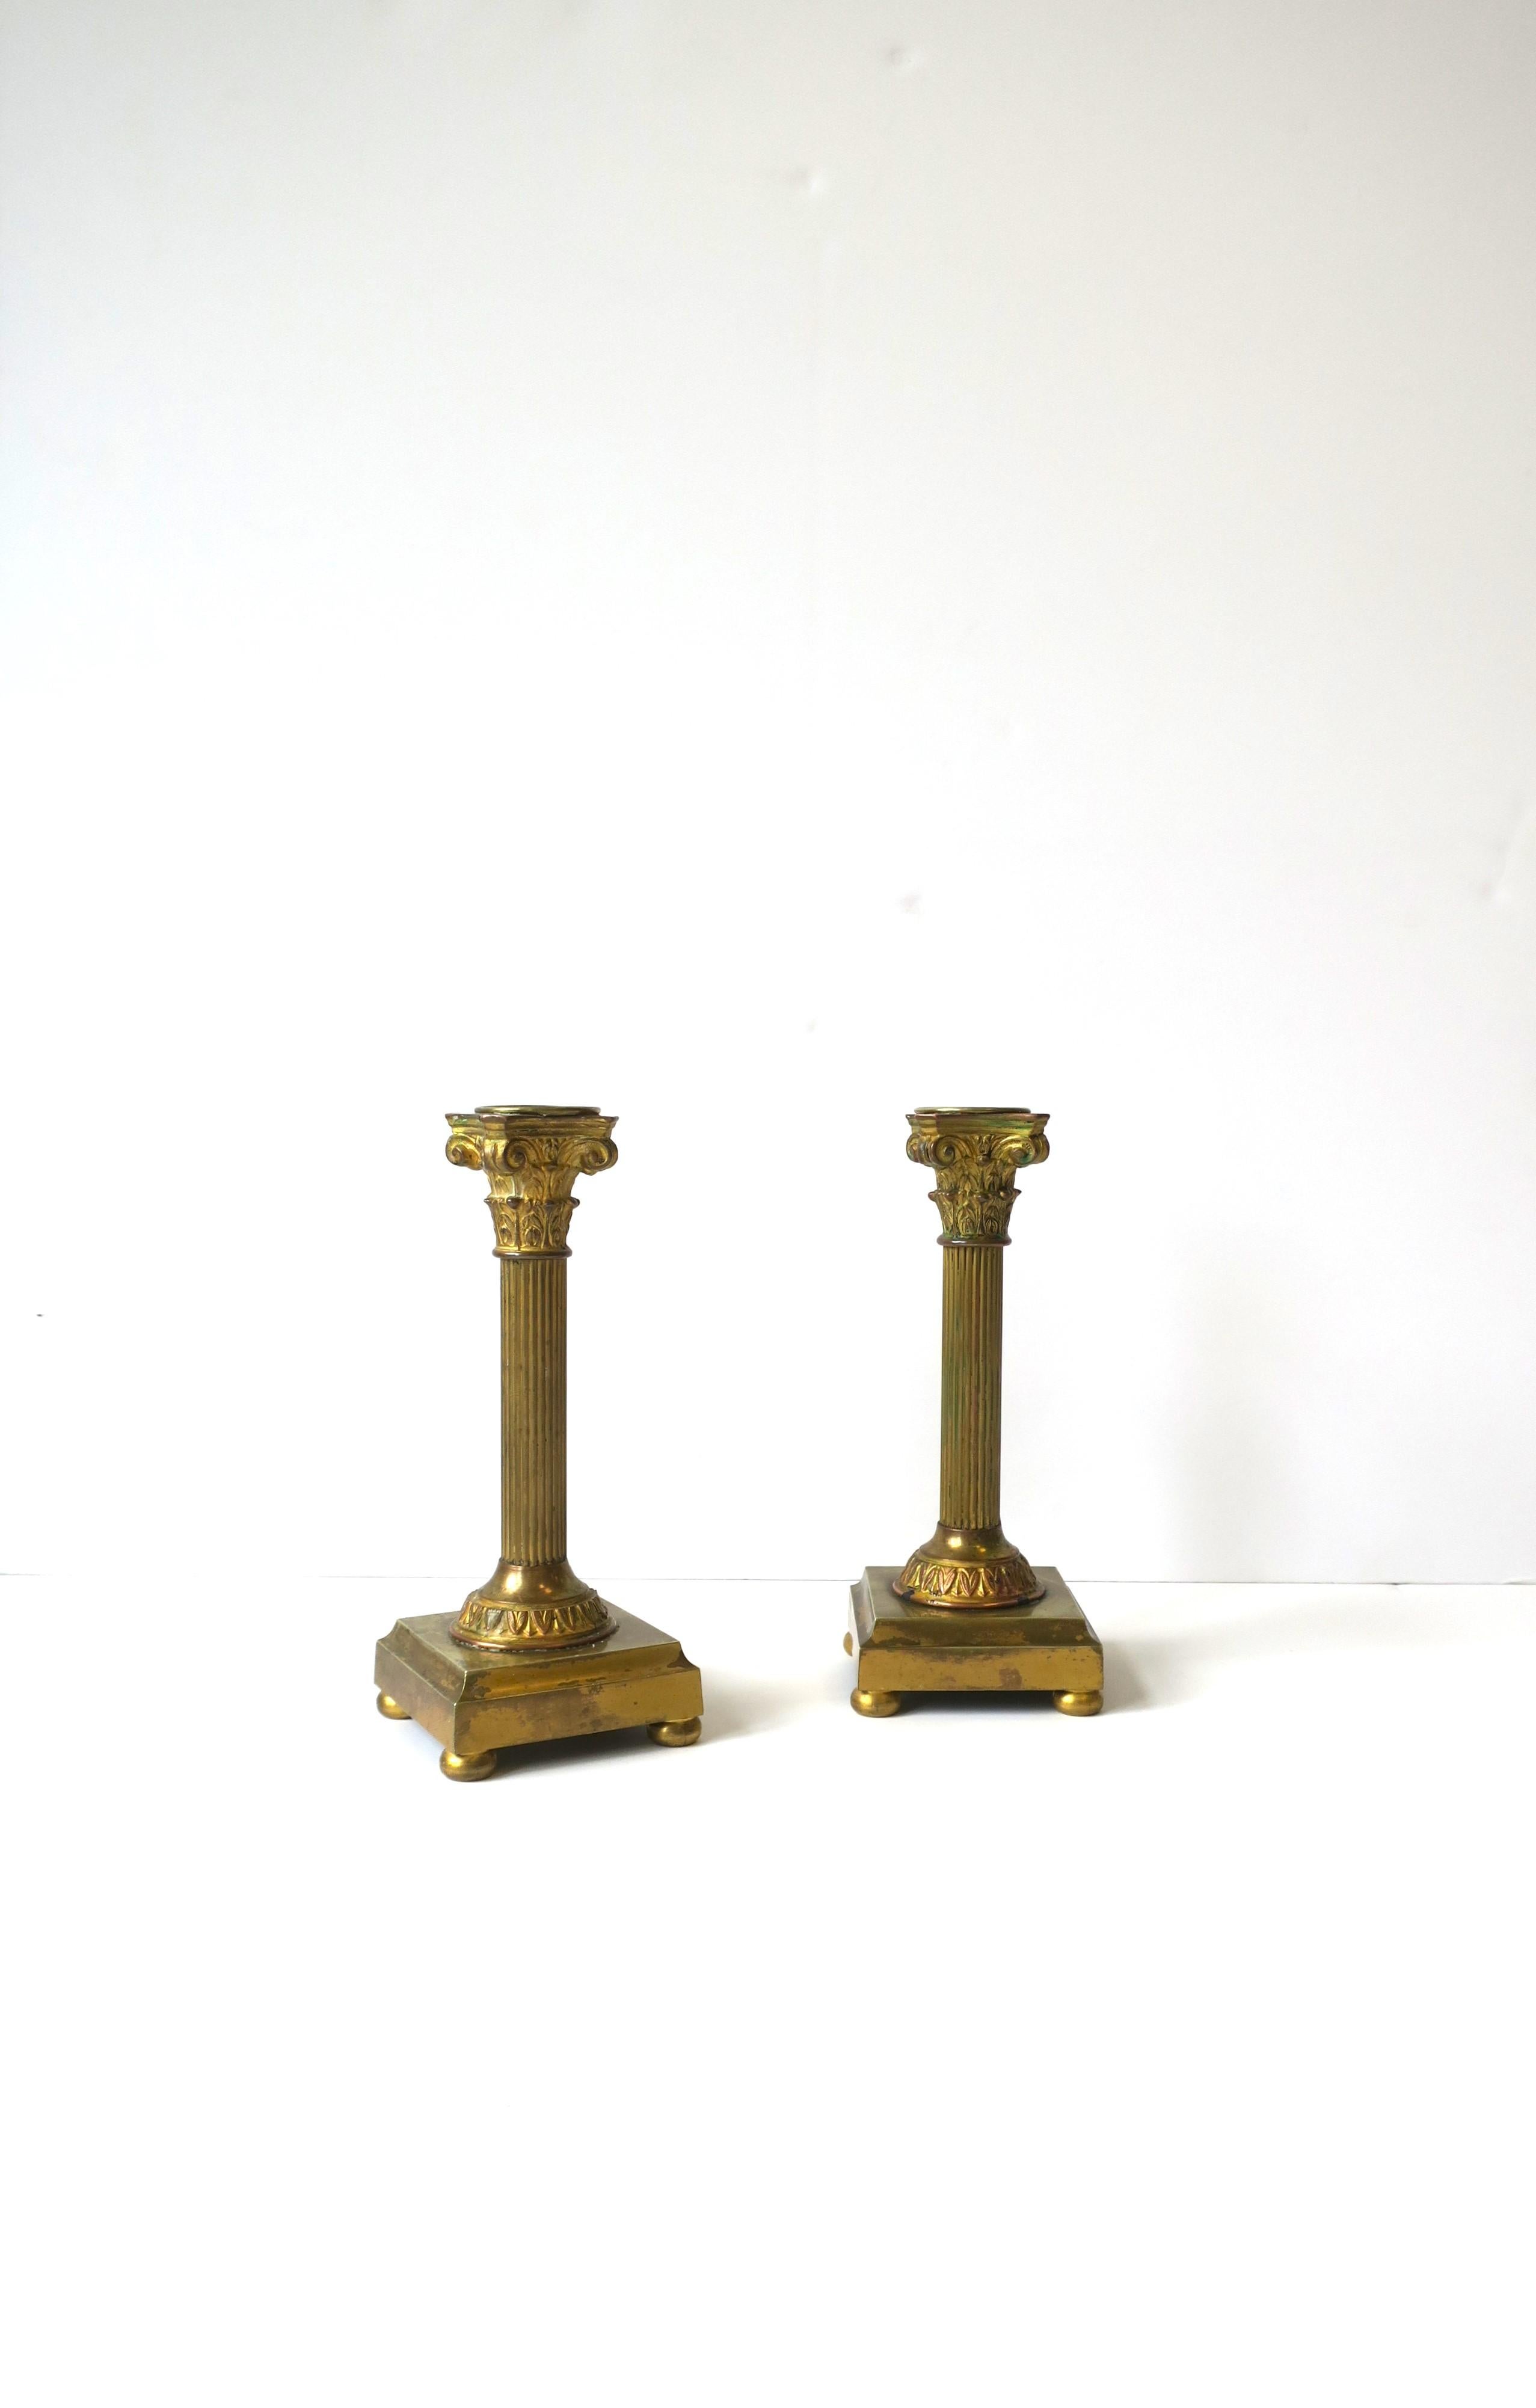 19th Century French Neoclassical Bronze Column Pillar Candlesticks Holders, Pair For Sale